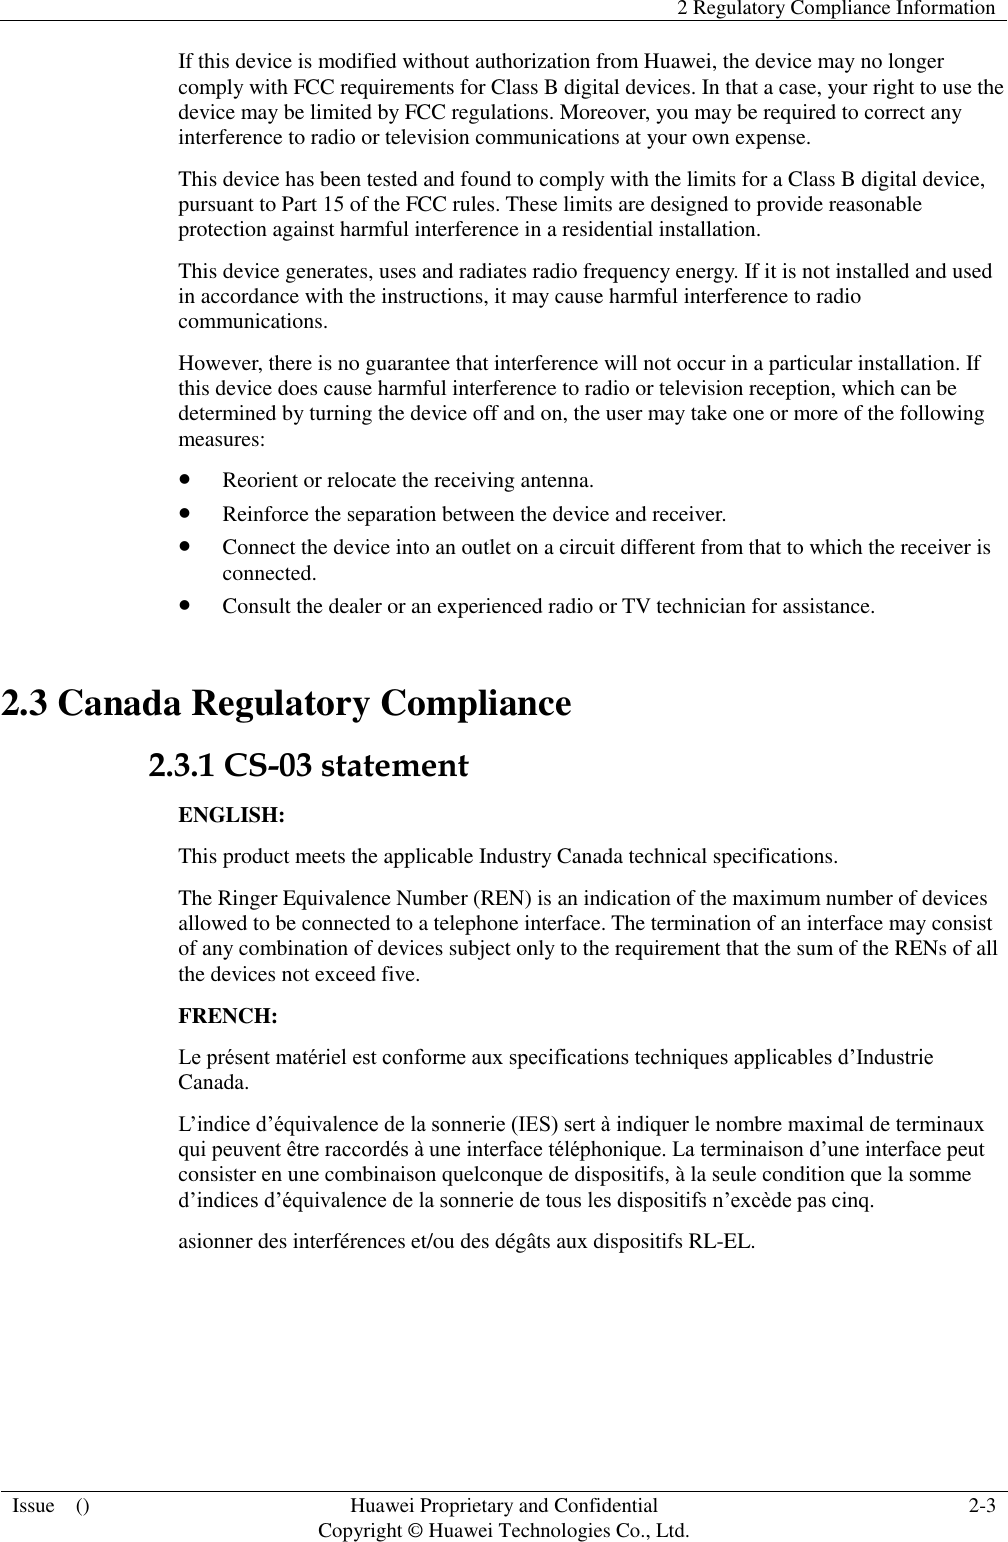   2 Regulatory Compliance Information  Issue    () Huawei Proprietary and Confidential                                     Copyright © Huawei Technologies Co., Ltd. 2-3  If this device is modified without authorization from Huawei, the device may no longer comply with FCC requirements for Class B digital devices. In that a case, your right to use the device may be limited by FCC regulations. Moreover, you may be required to correct any interference to radio or television communications at your own expense. This device has been tested and found to comply with the limits for a Class B digital device, pursuant to Part 15 of the FCC rules. These limits are designed to provide reasonable protection against harmful interference in a residential installation. This device generates, uses and radiates radio frequency energy. If it is not installed and used in accordance with the instructions, it may cause harmful interference to radio communications. However, there is no guarantee that interference will not occur in a particular installation. If this device does cause harmful interference to radio or television reception, which can be determined by turning the device off and on, the user may take one or more of the following measures:  Reorient or relocate the receiving antenna.  Reinforce the separation between the device and receiver.  Connect the device into an outlet on a circuit different from that to which the receiver is connected.  Consult the dealer or an experienced radio or TV technician for assistance. 2.3 Canada Regulatory Compliance 2.3.1 CS-03 statement ENGLISH: This product meets the applicable Industry Canada technical specifications.   The Ringer Equivalence Number (REN) is an indication of the maximum number of devices allowed to be connected to a telephone interface. The termination of an interface may consist of any combination of devices subject only to the requirement that the sum of the RENs of all the devices not exceed five. FRENCH: Le présent matériel est conforme aux specifications techniques applicables d’Industrie Canada. L’indice d’équivalence de la sonnerie (IES) sert à indiquer le nombre maximal de terminaux qui peuvent être raccordés à une interface téléphonique. La terminaison d’une interface peut consister en une combinaison quelconque de dispositifs, à la seule condition que la somme d’indices d’équivalence de la sonnerie de tous les dispositifs n’excède pas cinq. asionner des interférences et/ou des dégâts aux dispositifs RL-EL.  